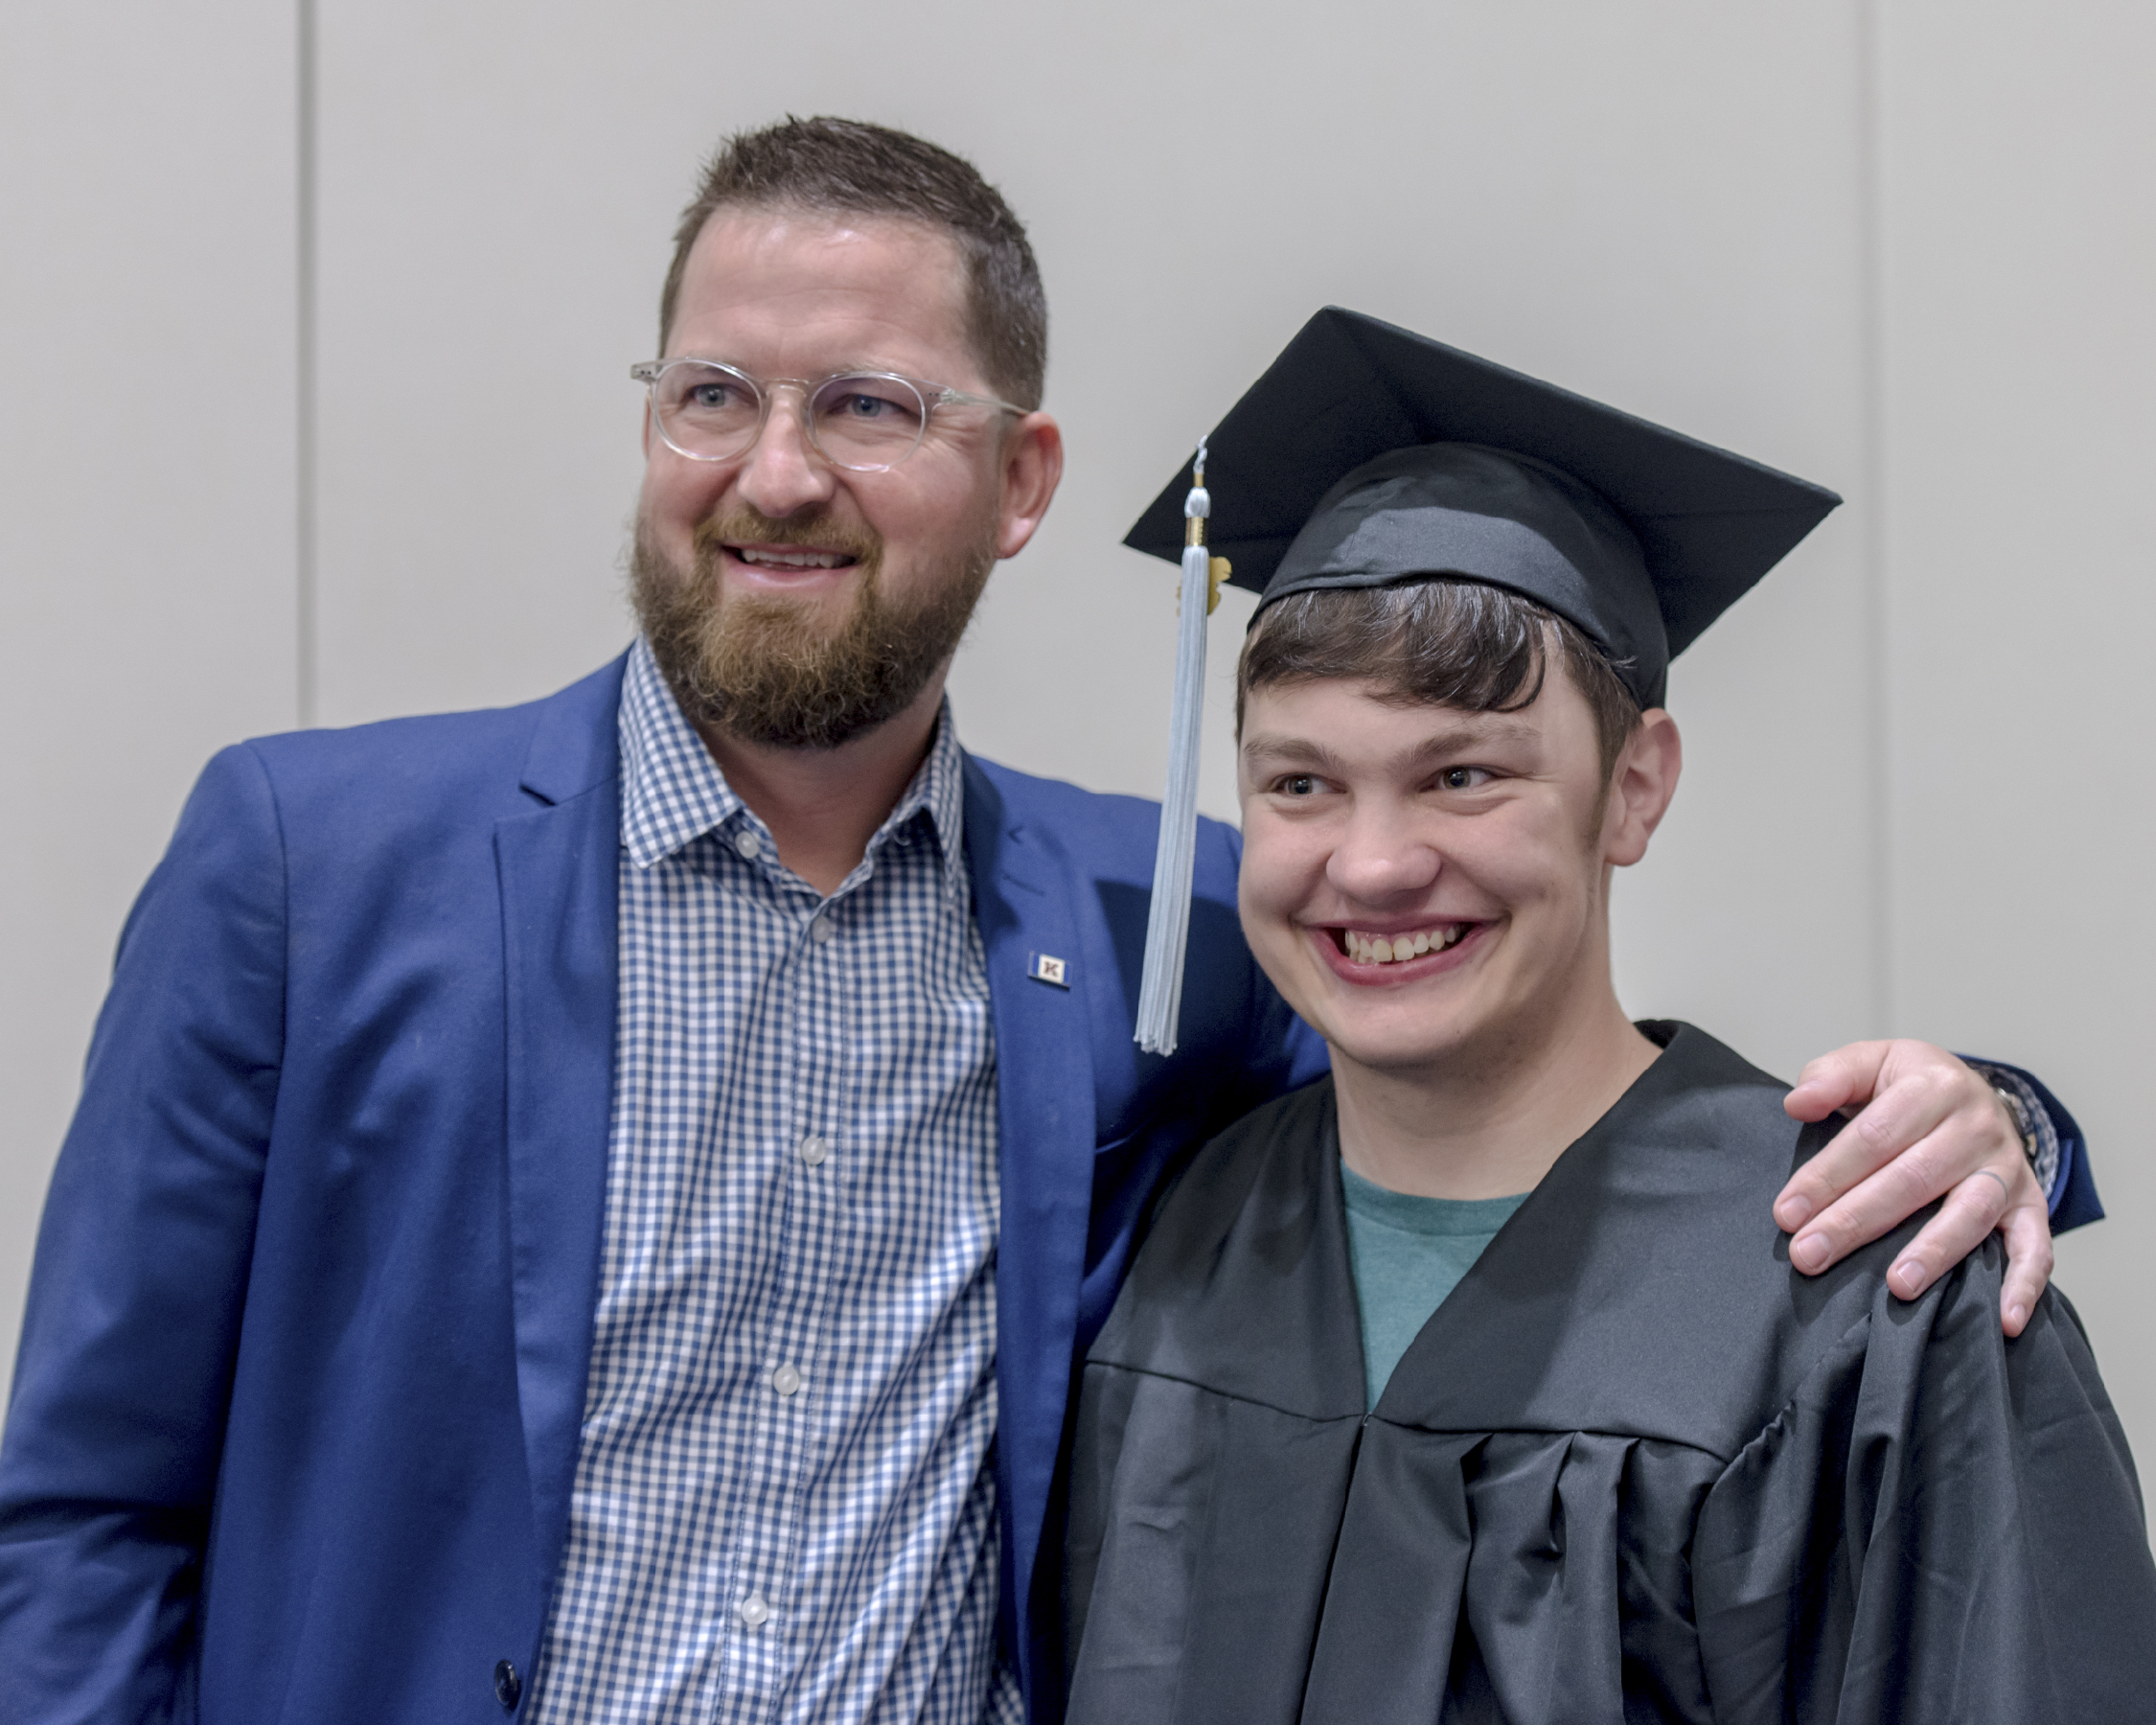 "An older man with a beard and glasses stands with his arm around a younger man wearing graduation cap and gown while both smile"